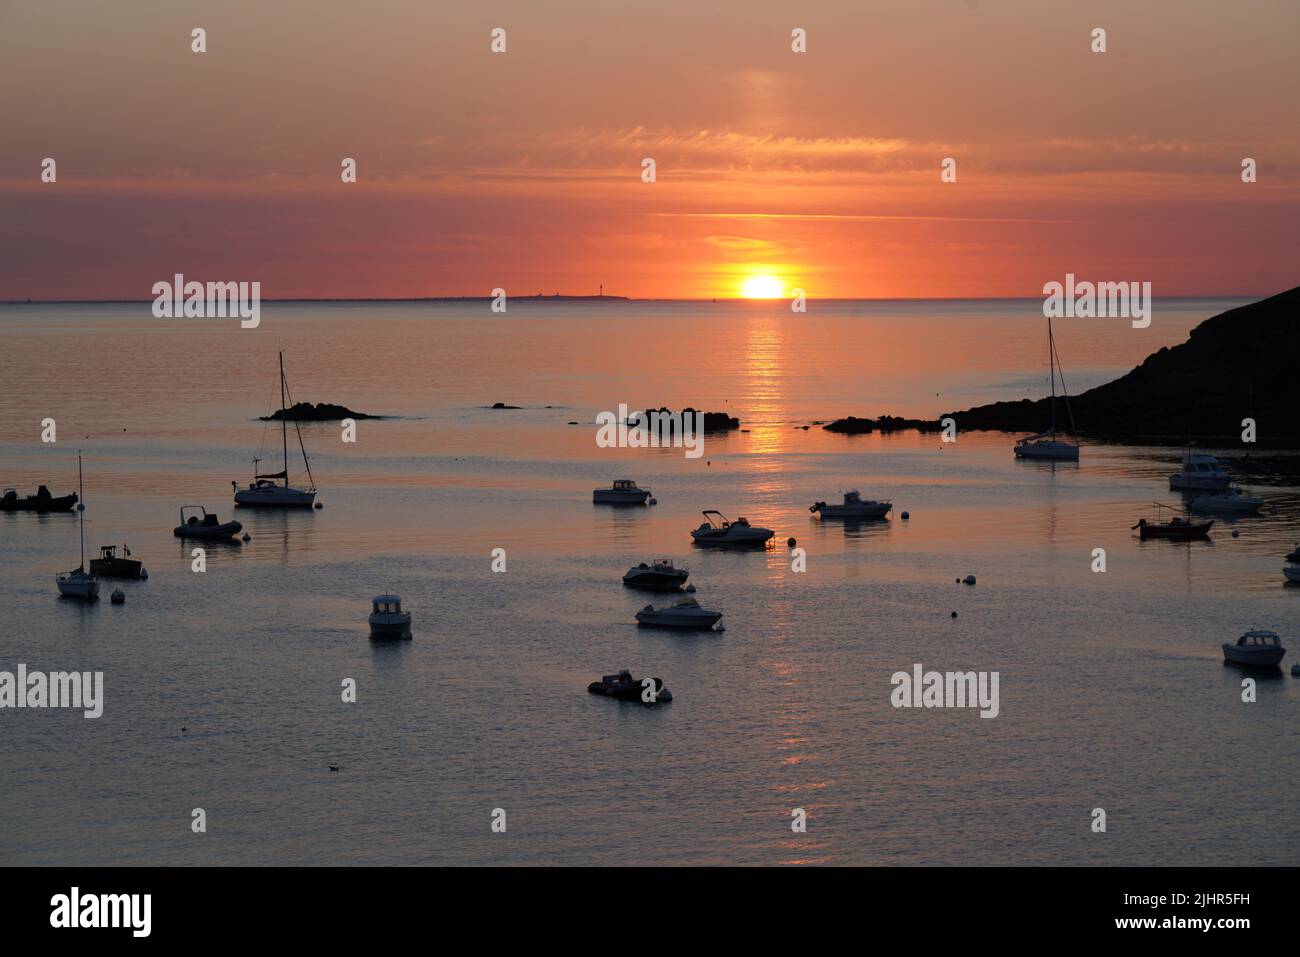 France, Bretagne region (Brittany), North tip of Finistère, pays d'Iroise, Ploumoguer, beach of Illlien, sunset, view over the Île d'Ouessant, Stock Photo